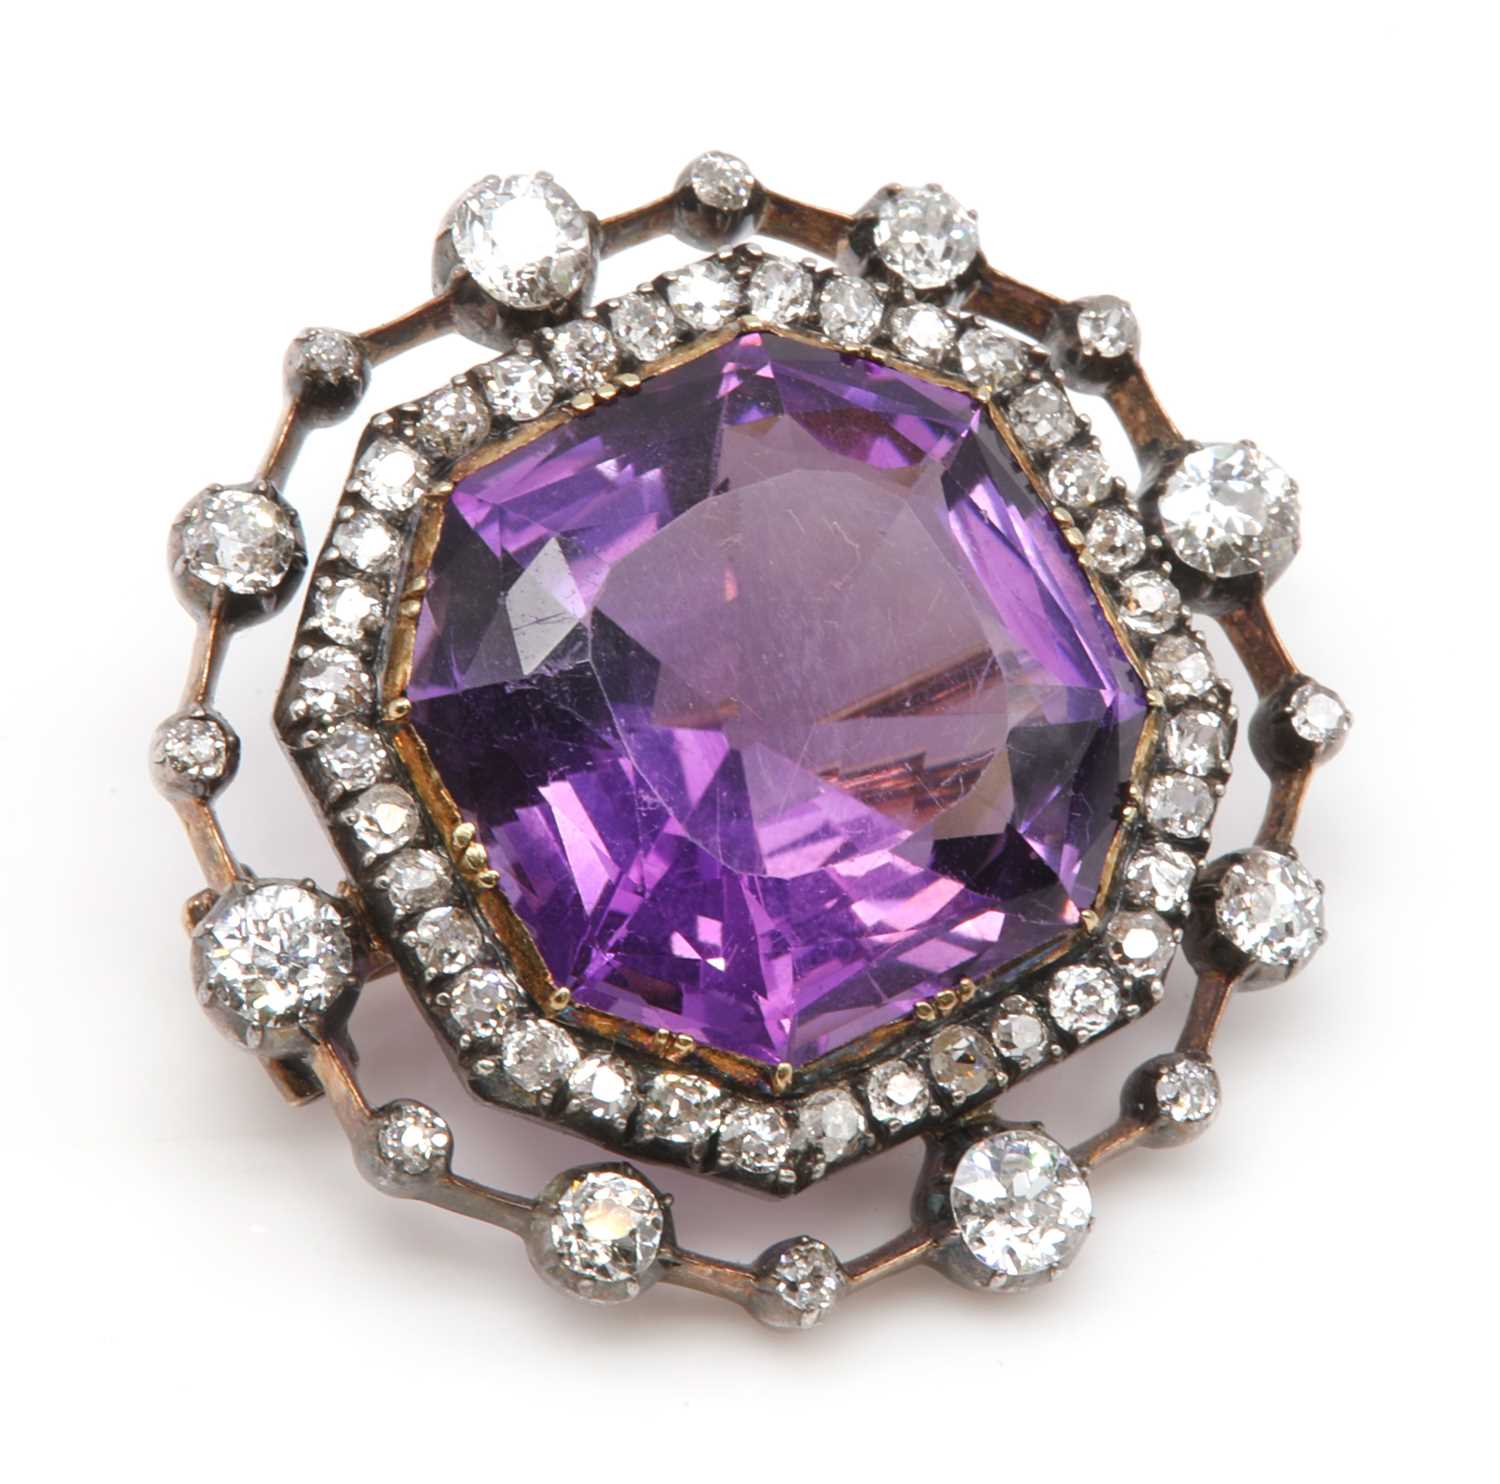 Lot 57 - A late Victorian amethyst and diamond brooch, c.1890